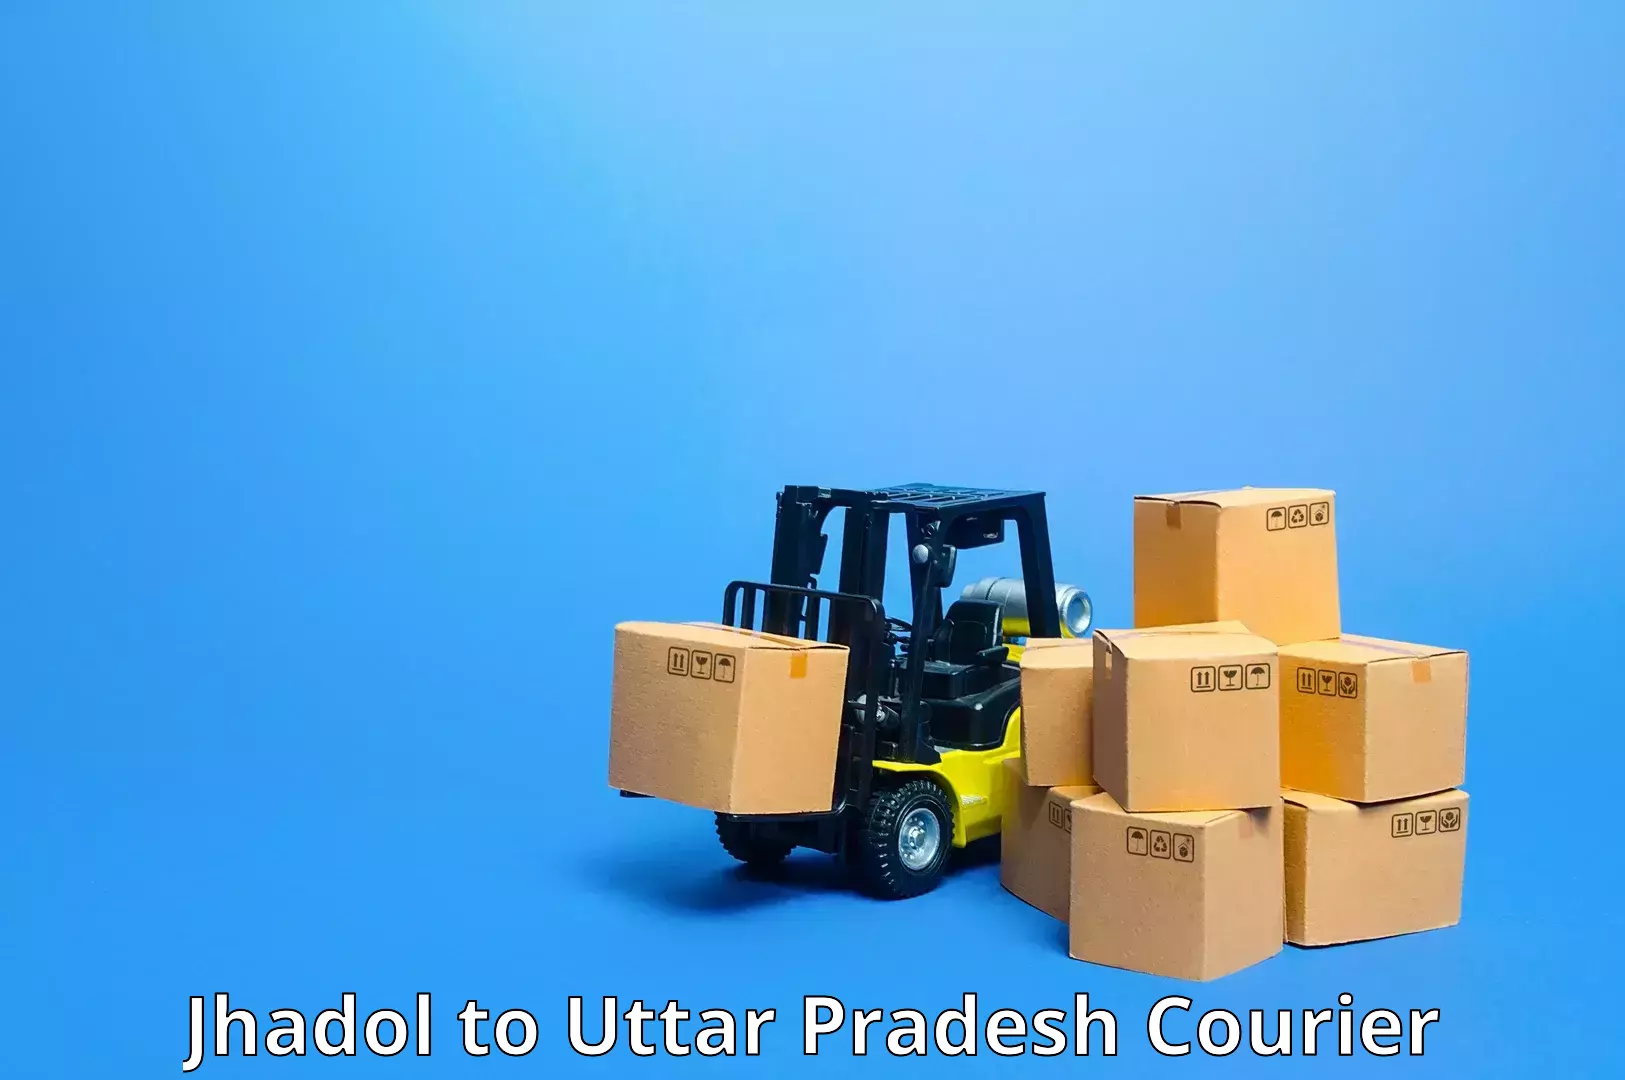 Pharmaceutical courier Jhadol to Rath